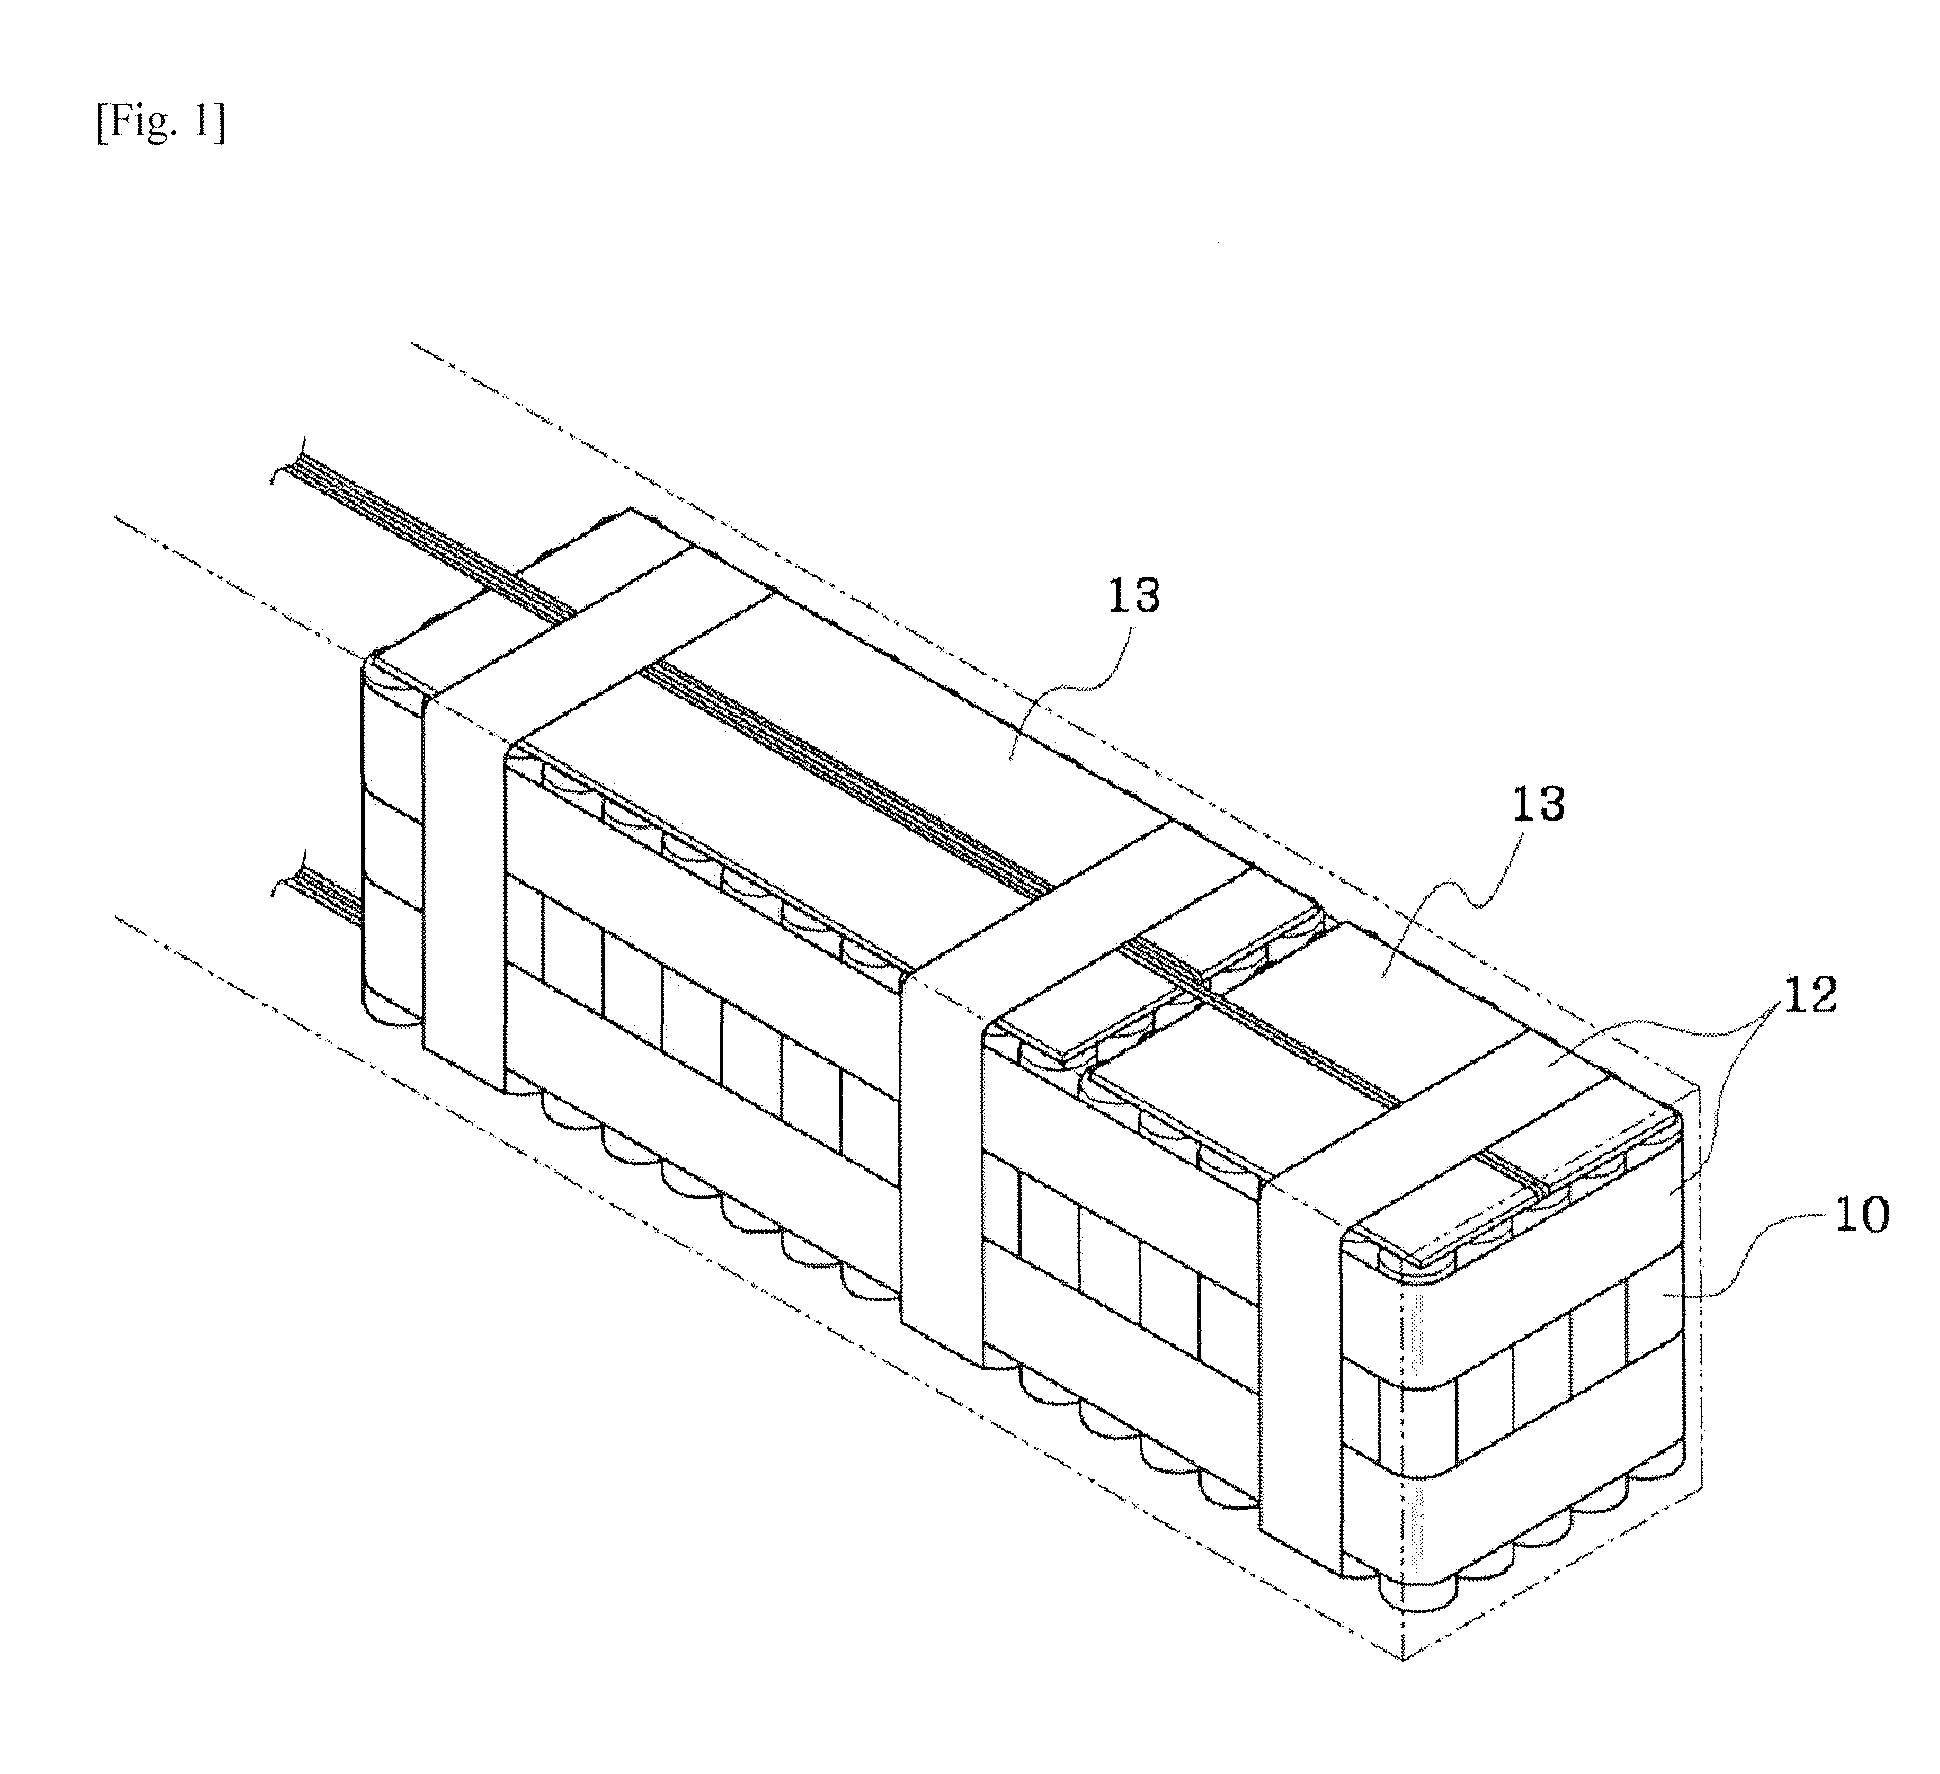 Cell Cartridge with a Composite Intercell Connecting Net Structure